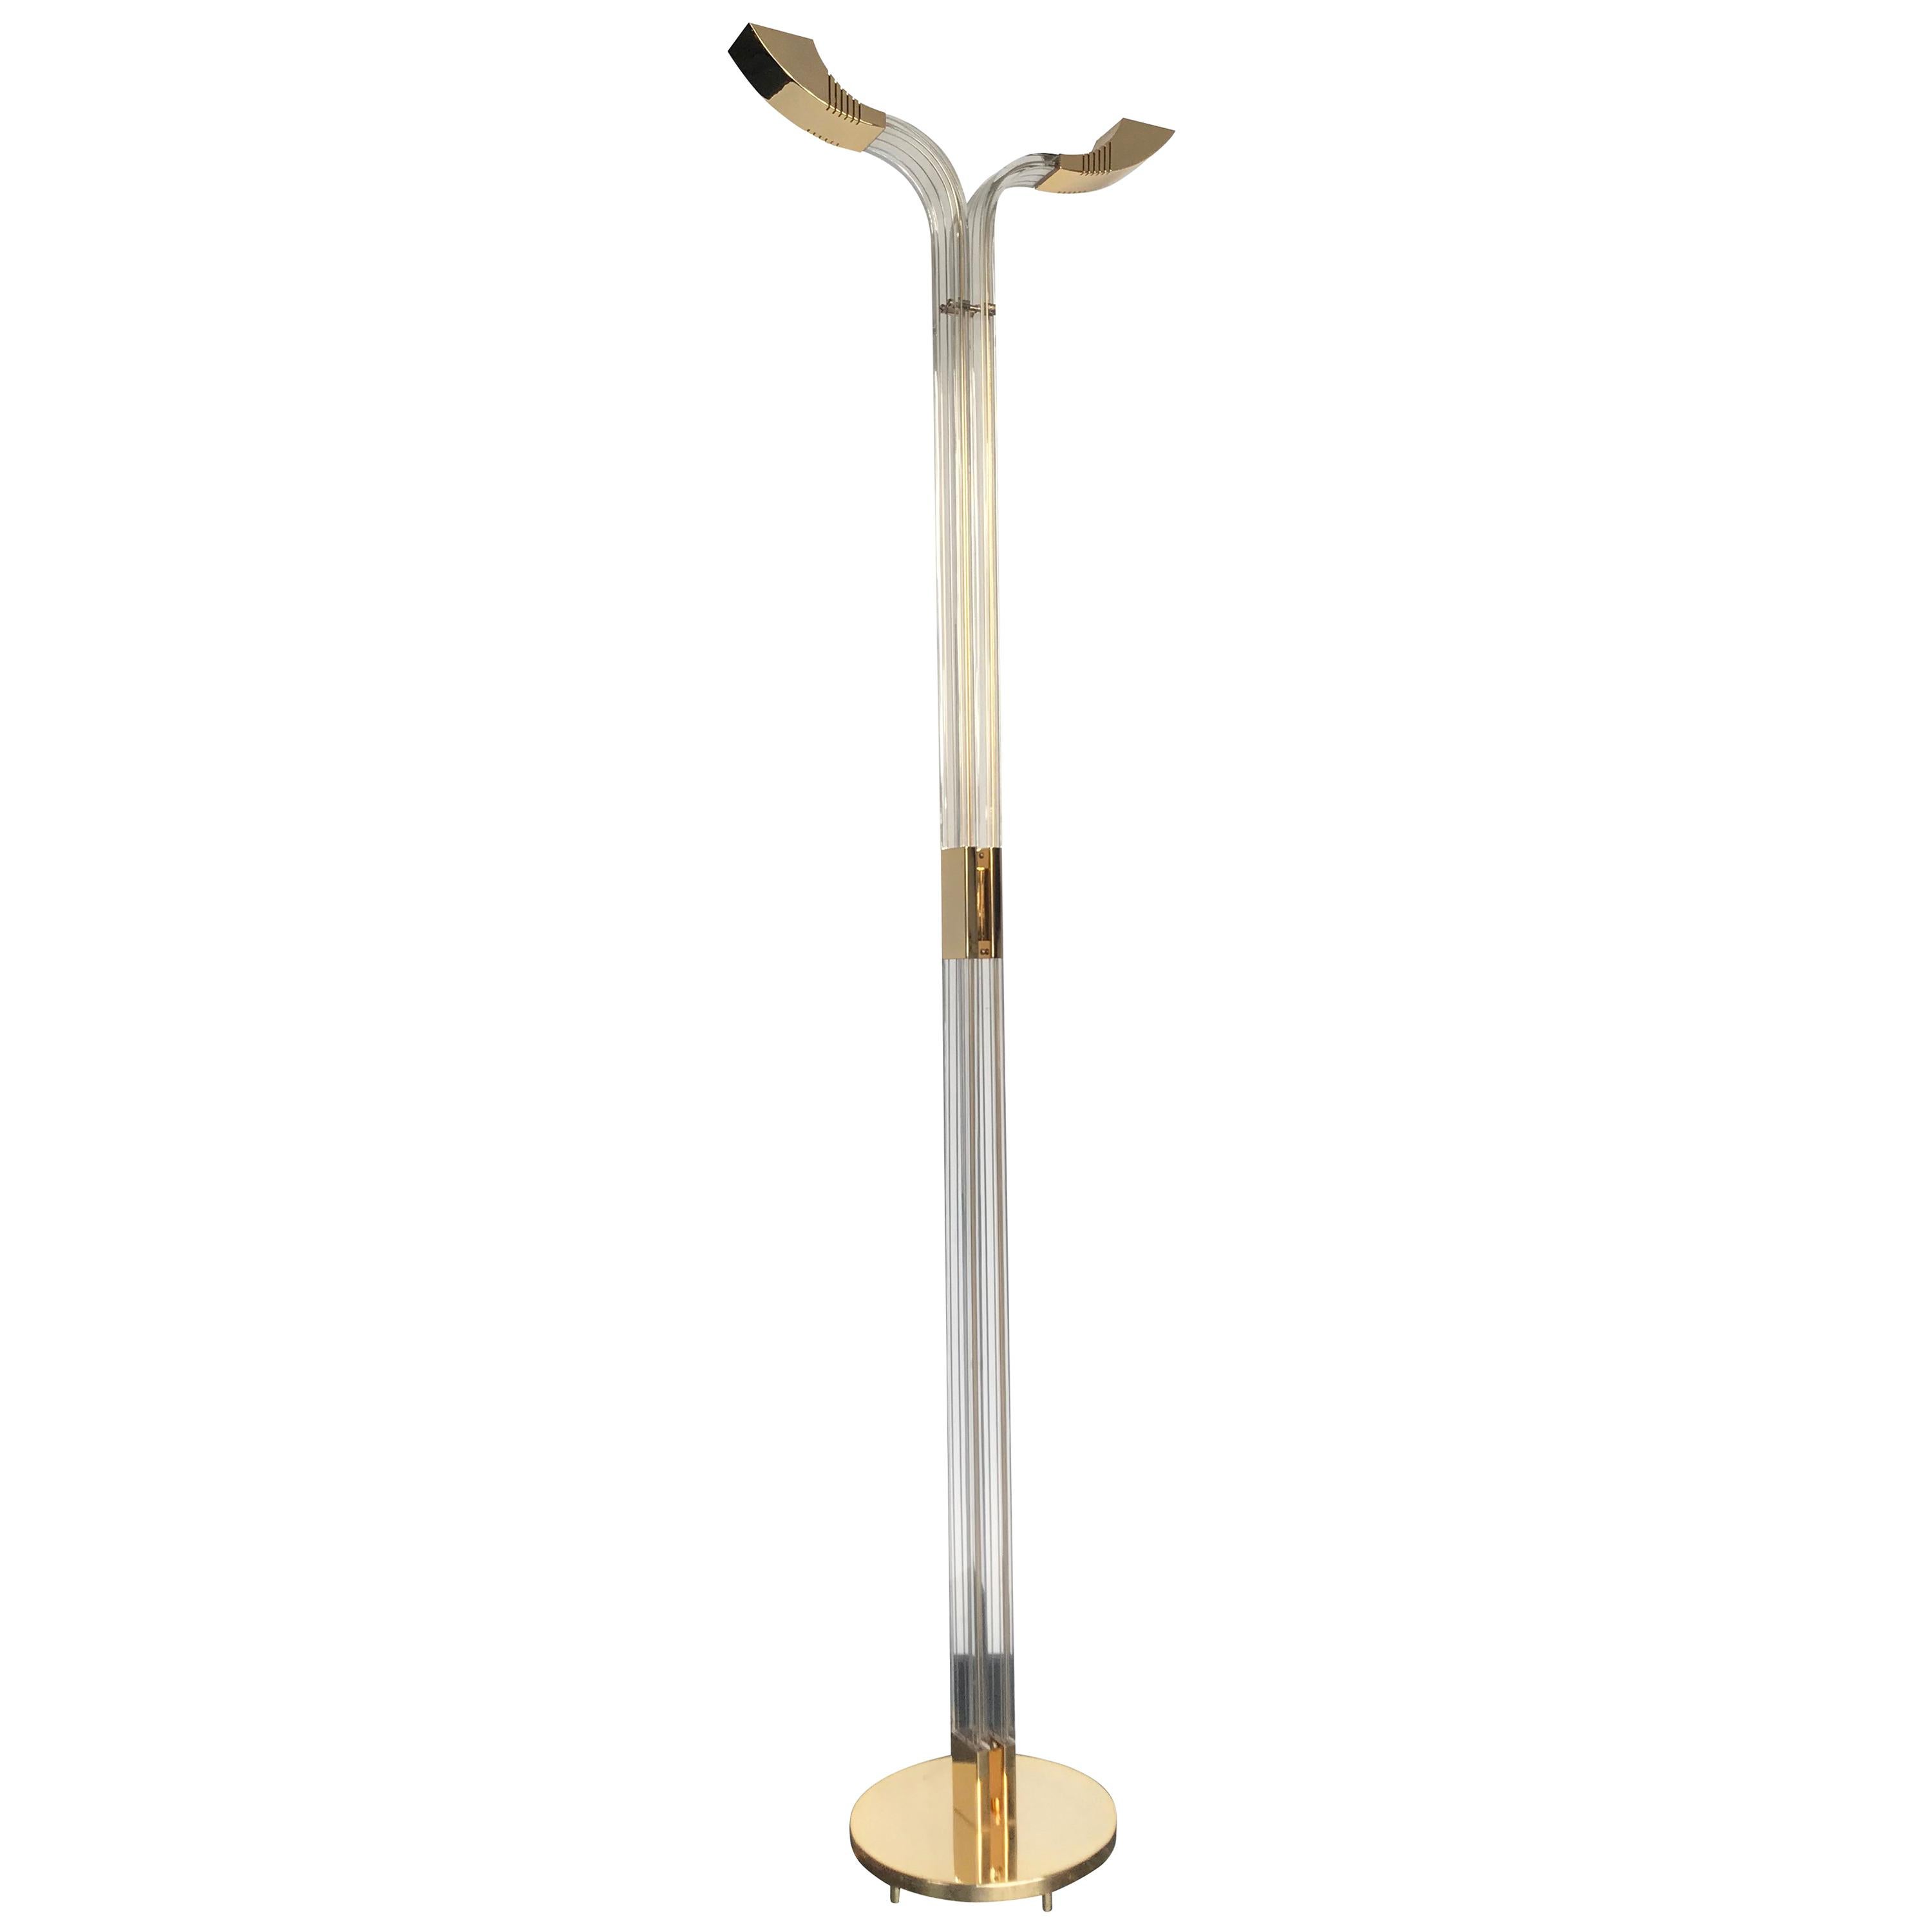 Art Deco Style Lucite and Gilt Metal Floor Lamp